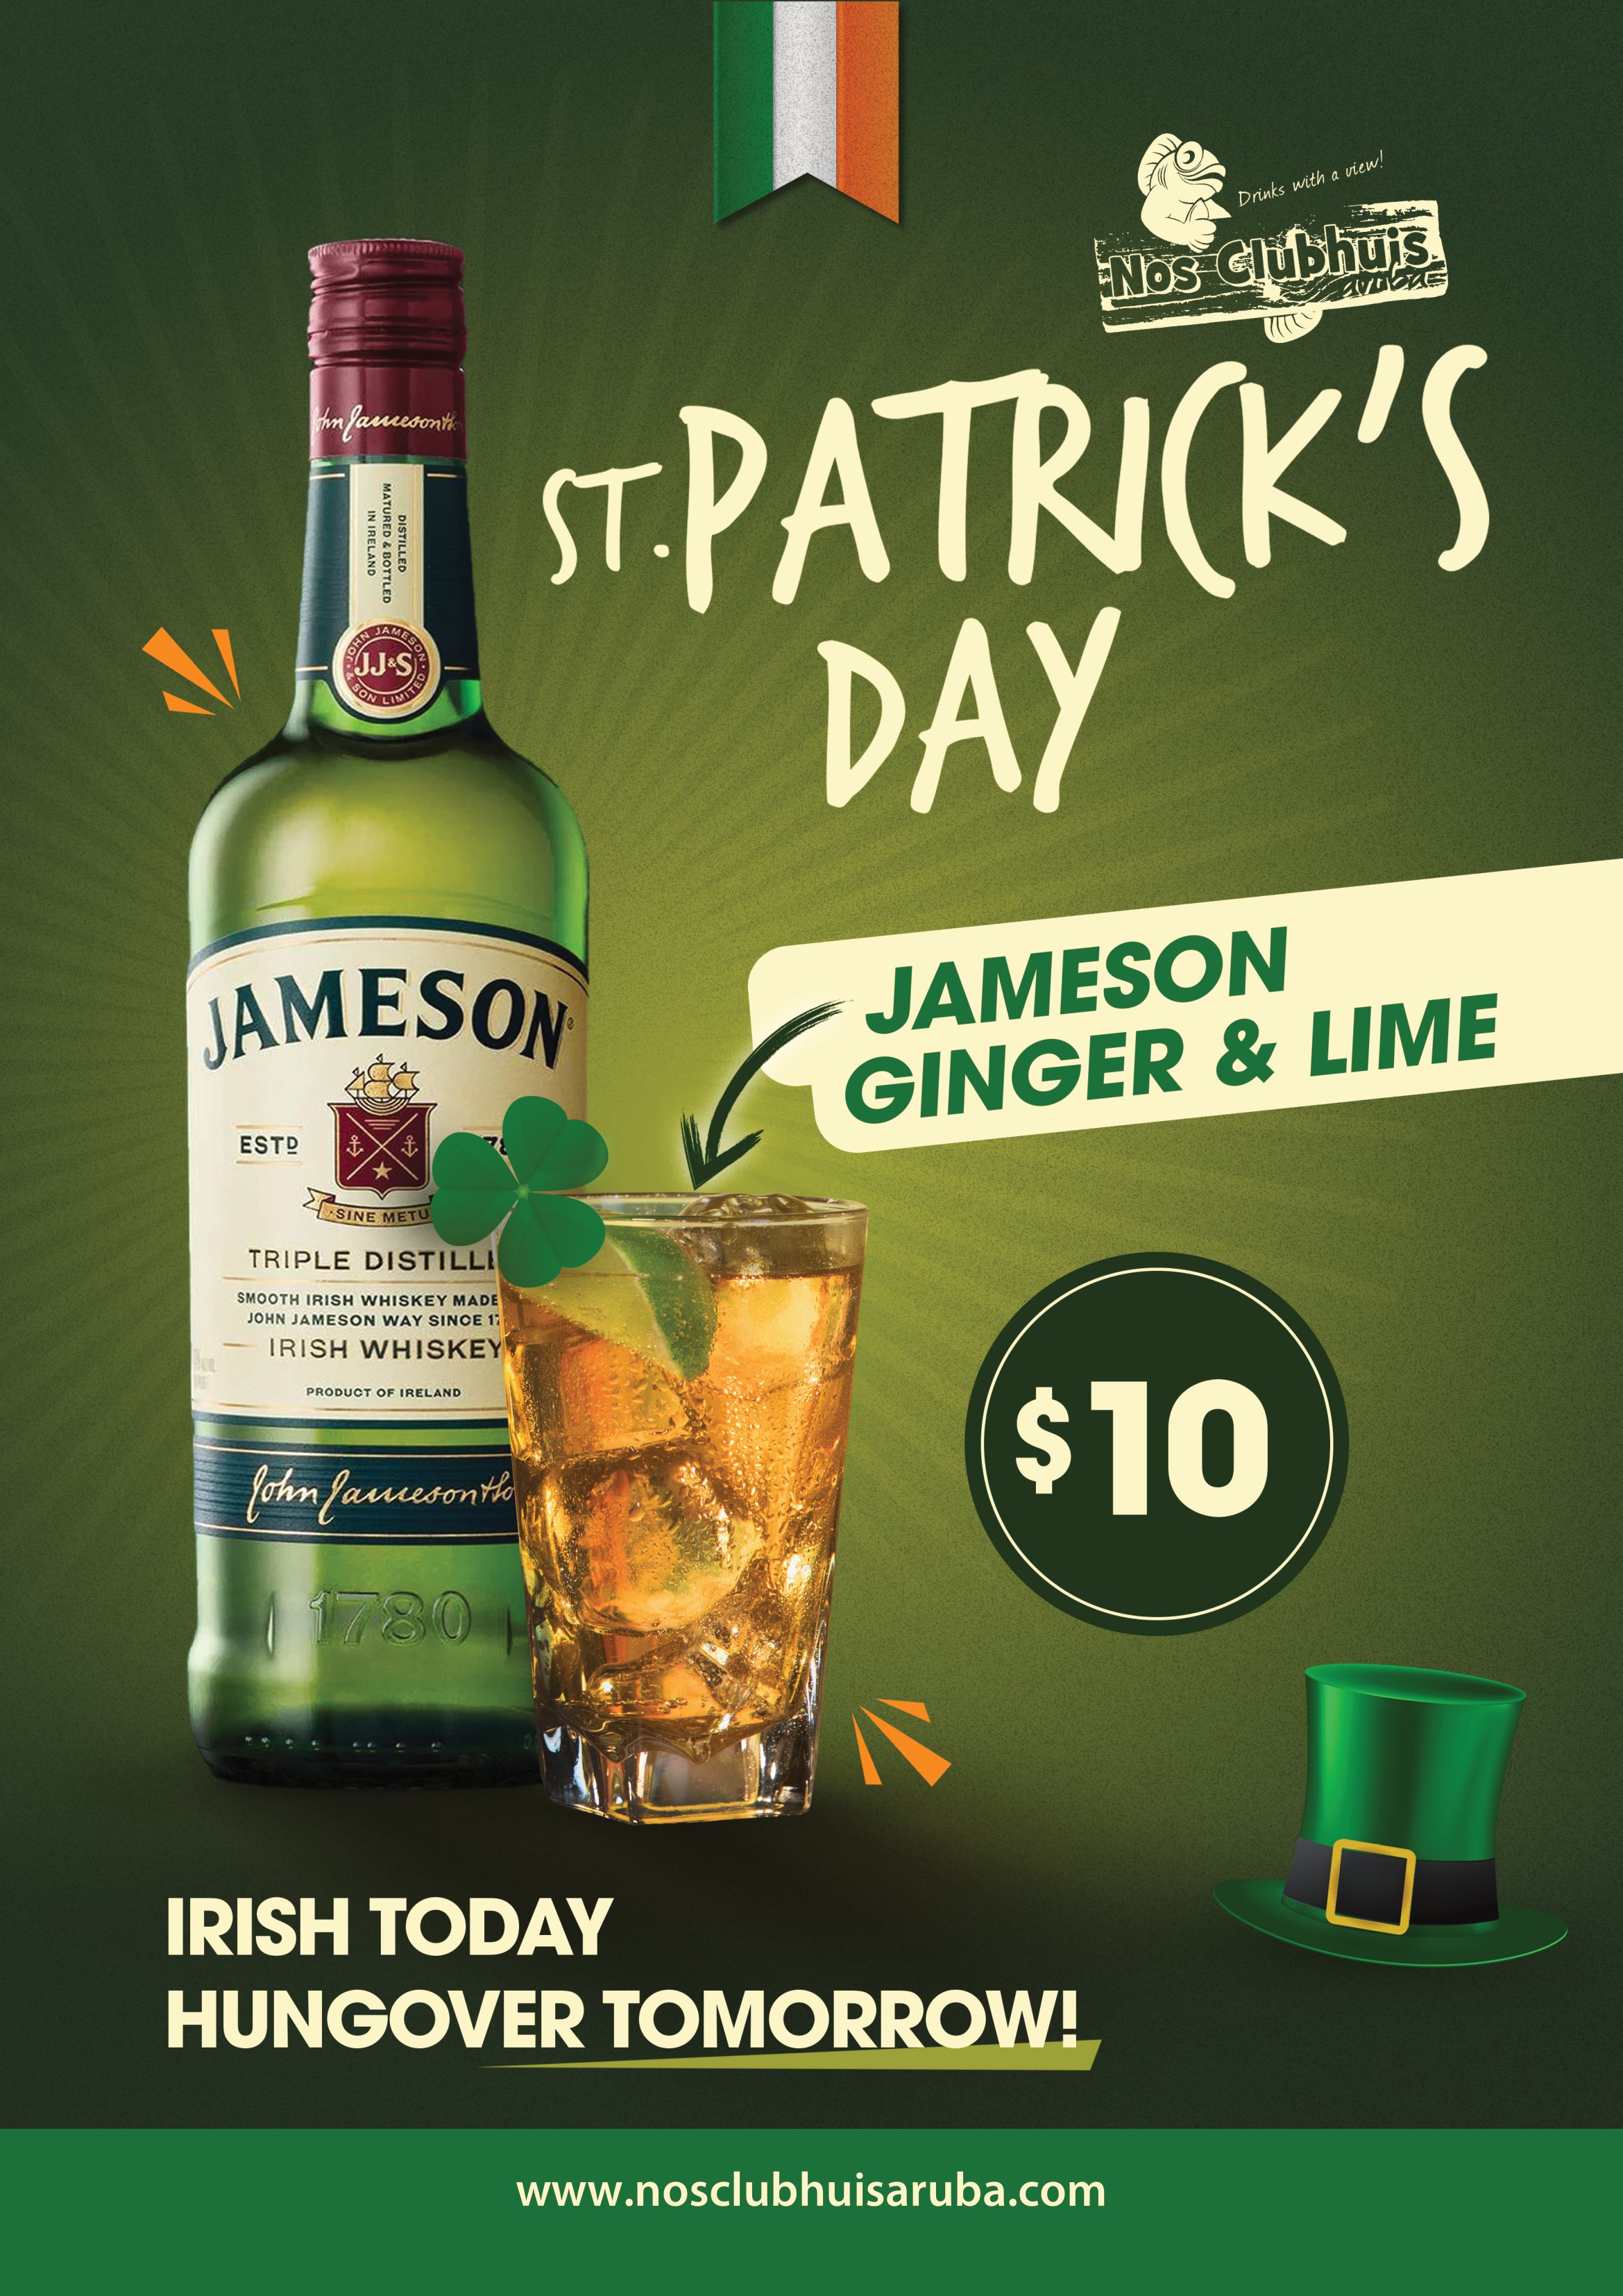 Looking for a fun way to celebrate St. Patrick's Day in Aruba? Look no further than Nos Clubhuis! On Friday, March 17th, Nos Clubhuis will be serving up a special cocktail, the Jameson Ginger & Lime, for just $10. Available from 10 AM to 11 PM, this delicious drink is the perfect way to get into the holiday spirit.